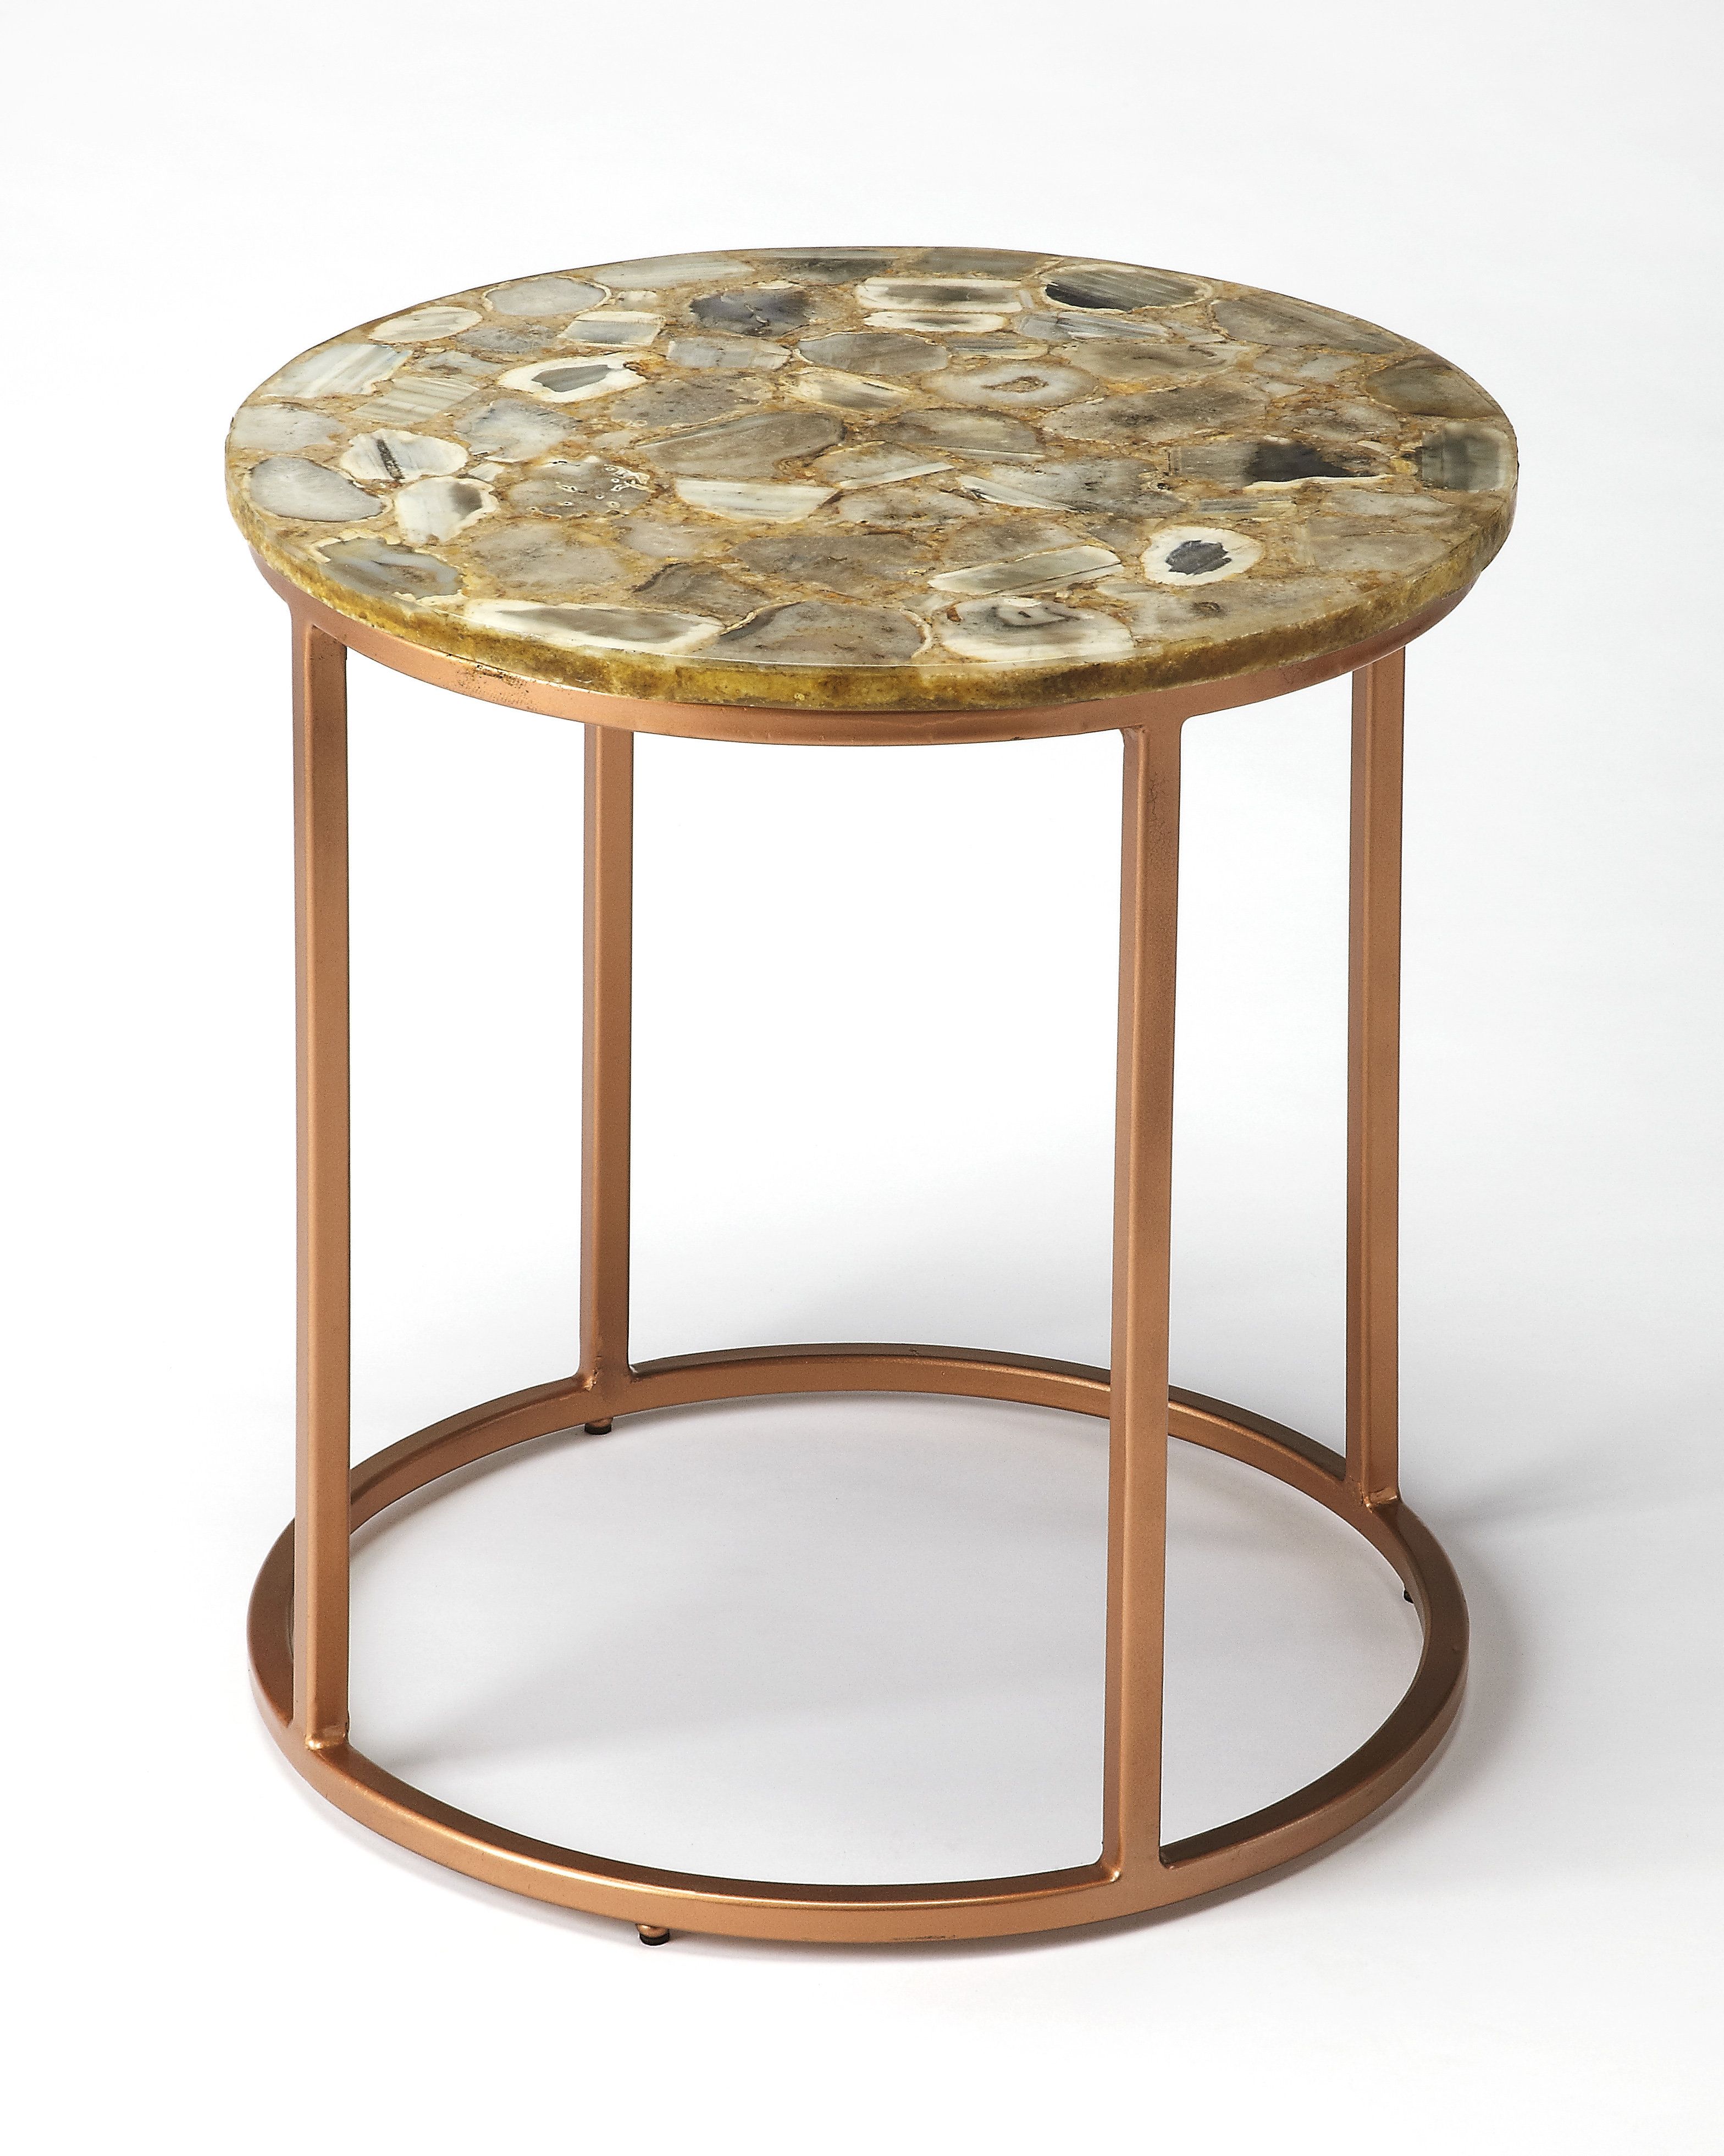 Everly Quinn Aliya Agate End Table | Wayfair Regarding Mix Agate Metal Frame Console Tables (View 24 of 30)